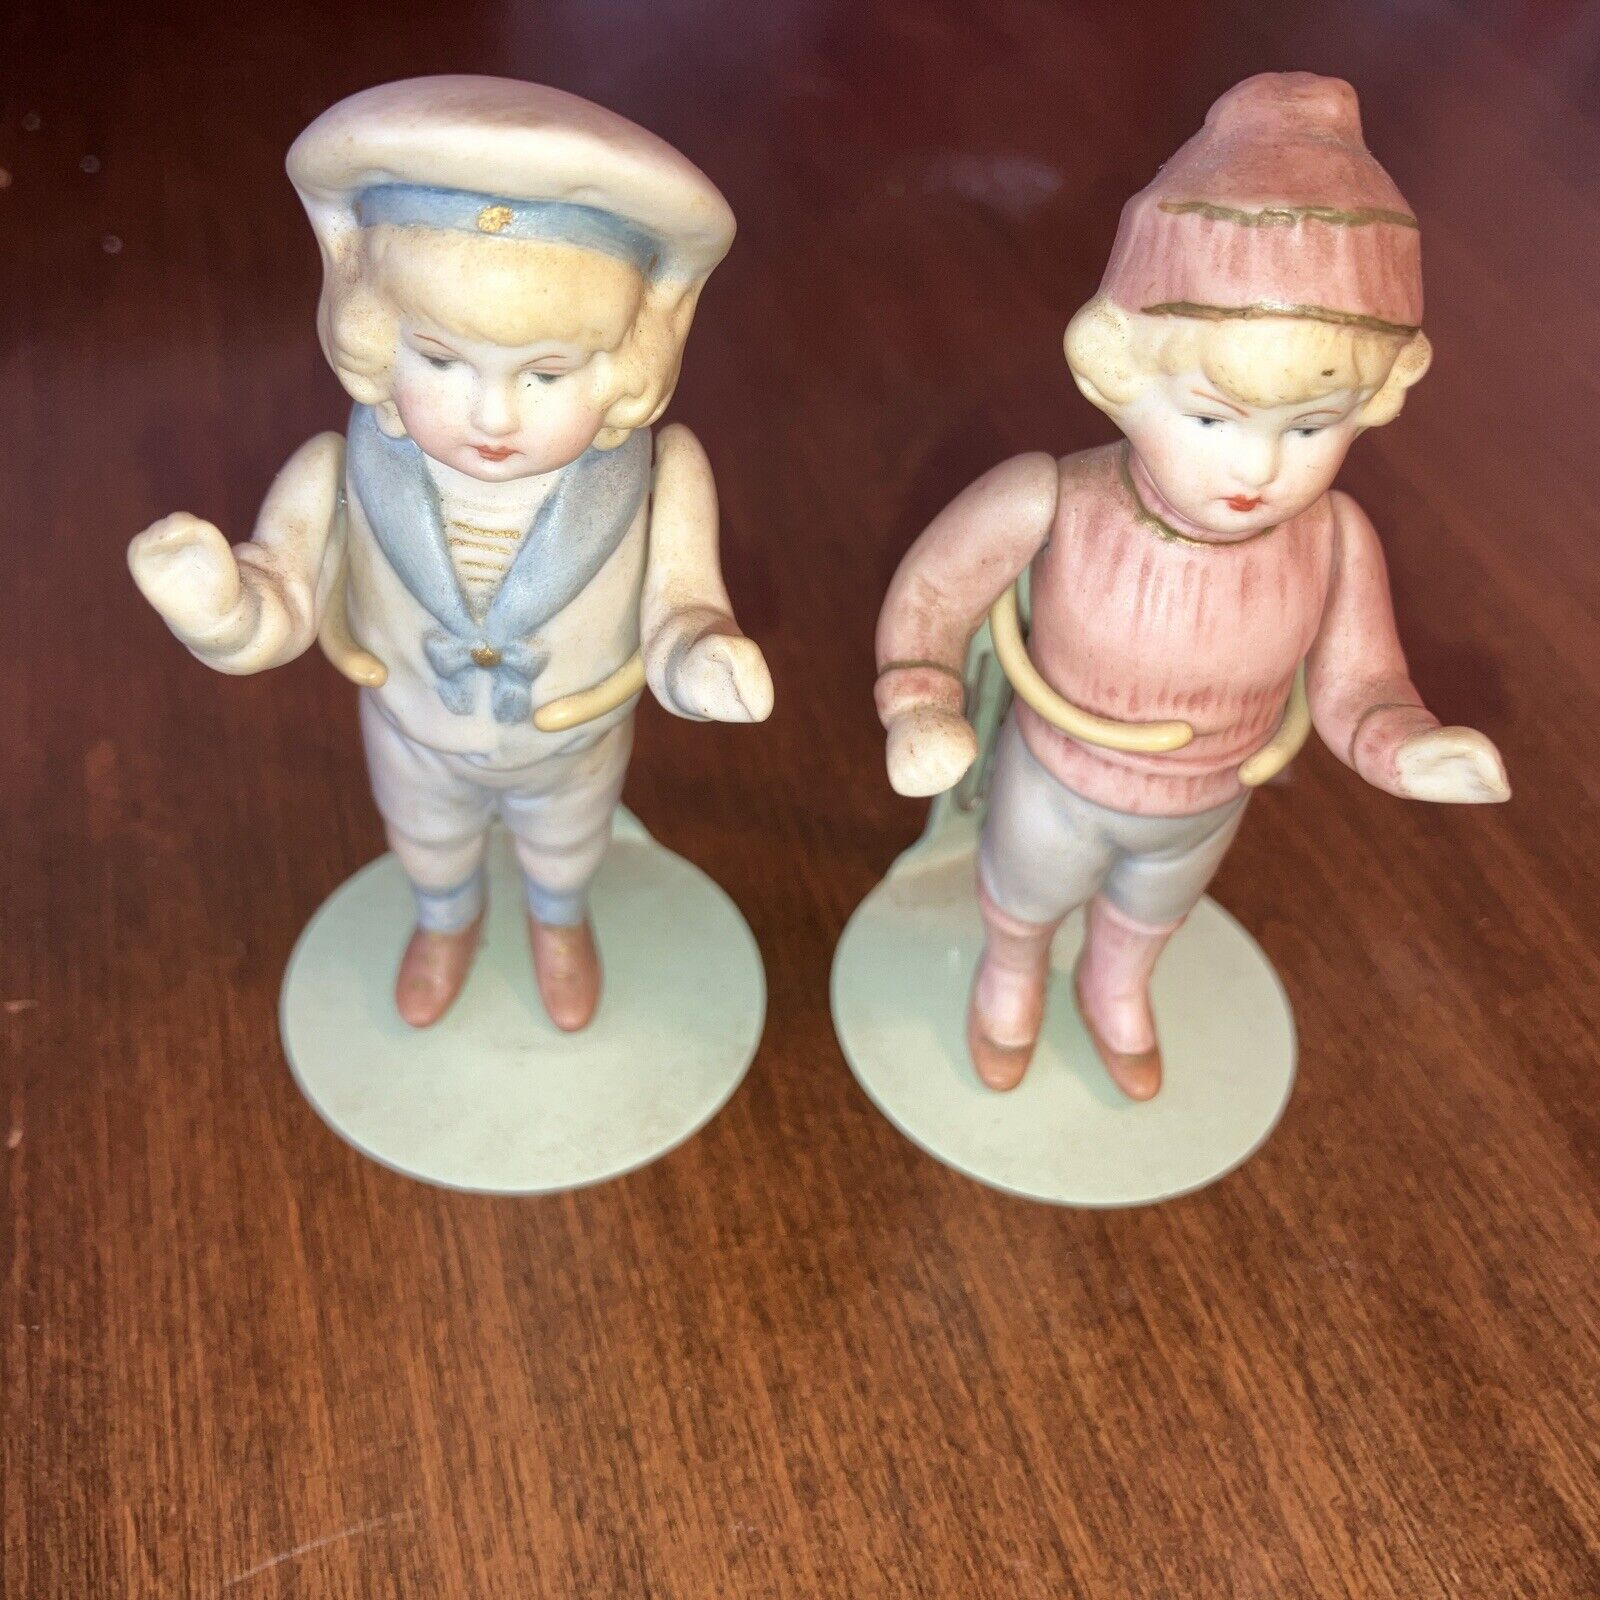 Lot Of 2 Vintage Antique bisque figurine Possibly German Jointed Arms